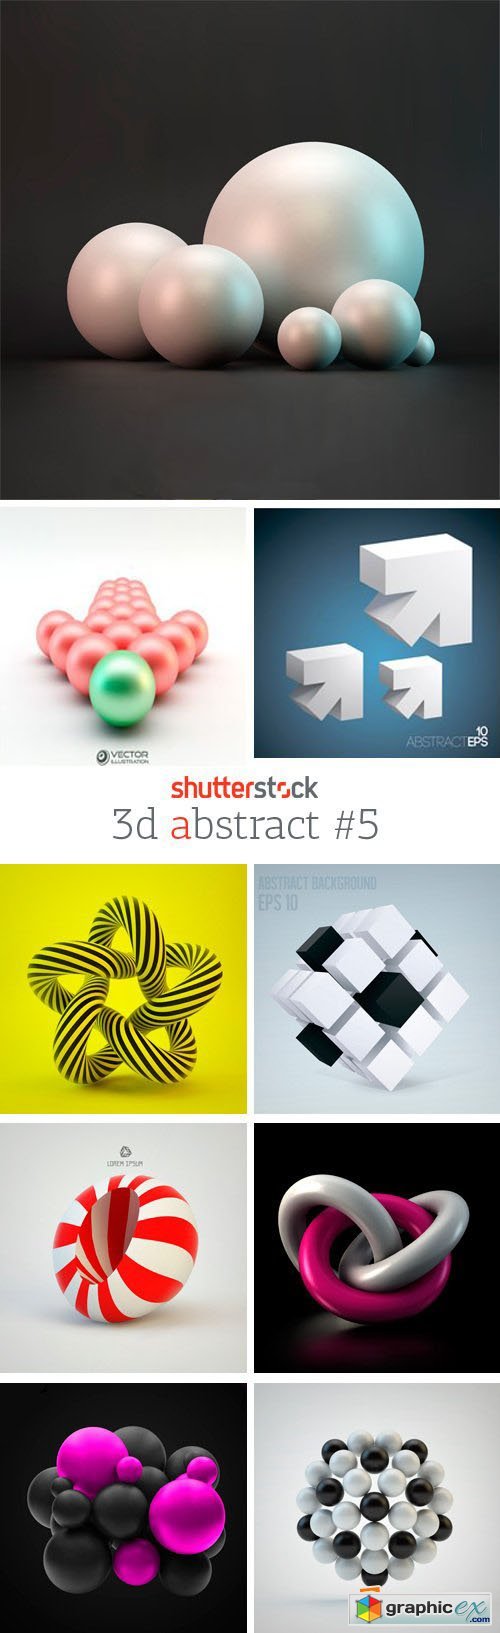 Amazing SS - 3D Abstract 5, 25xEPS